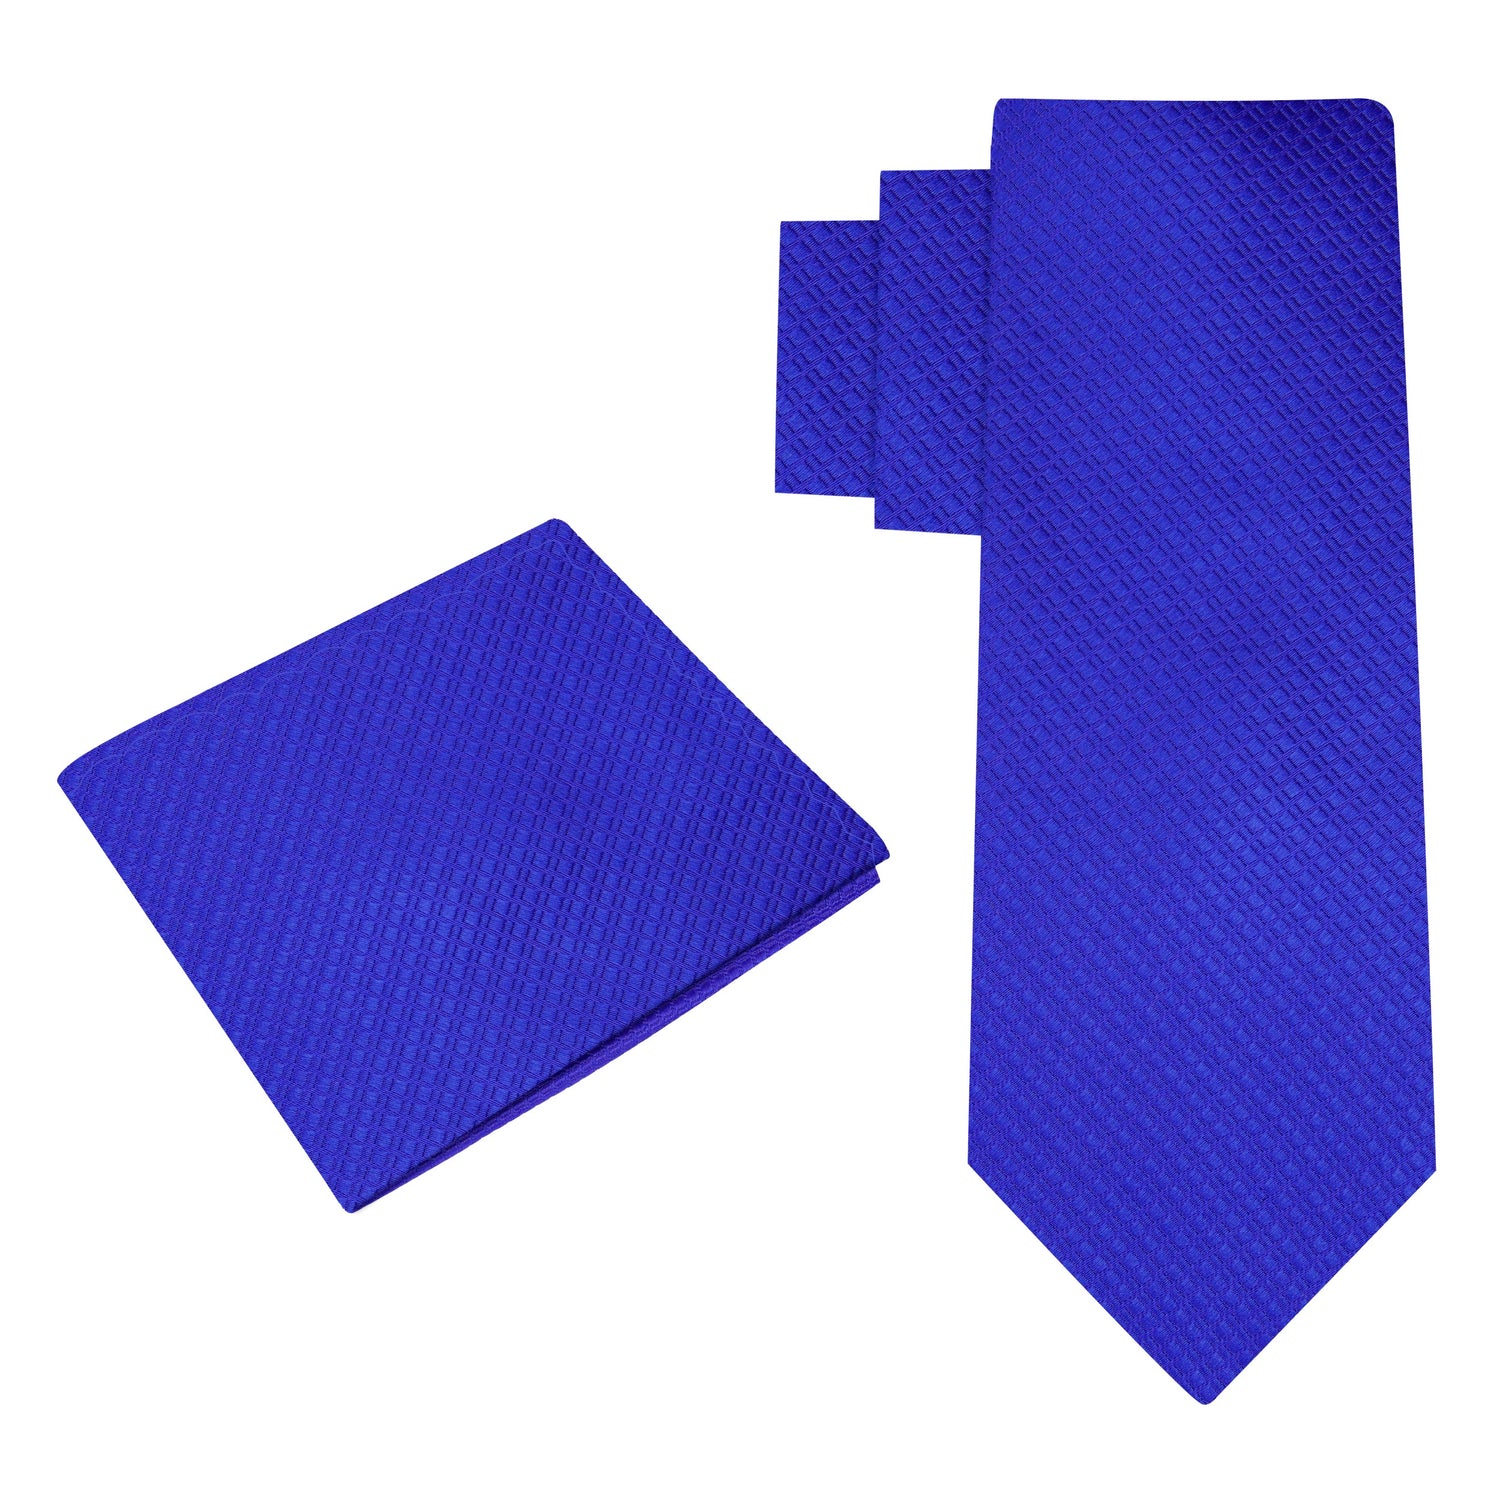 alt view: Solid Blue Textured Tie and Pocket Square